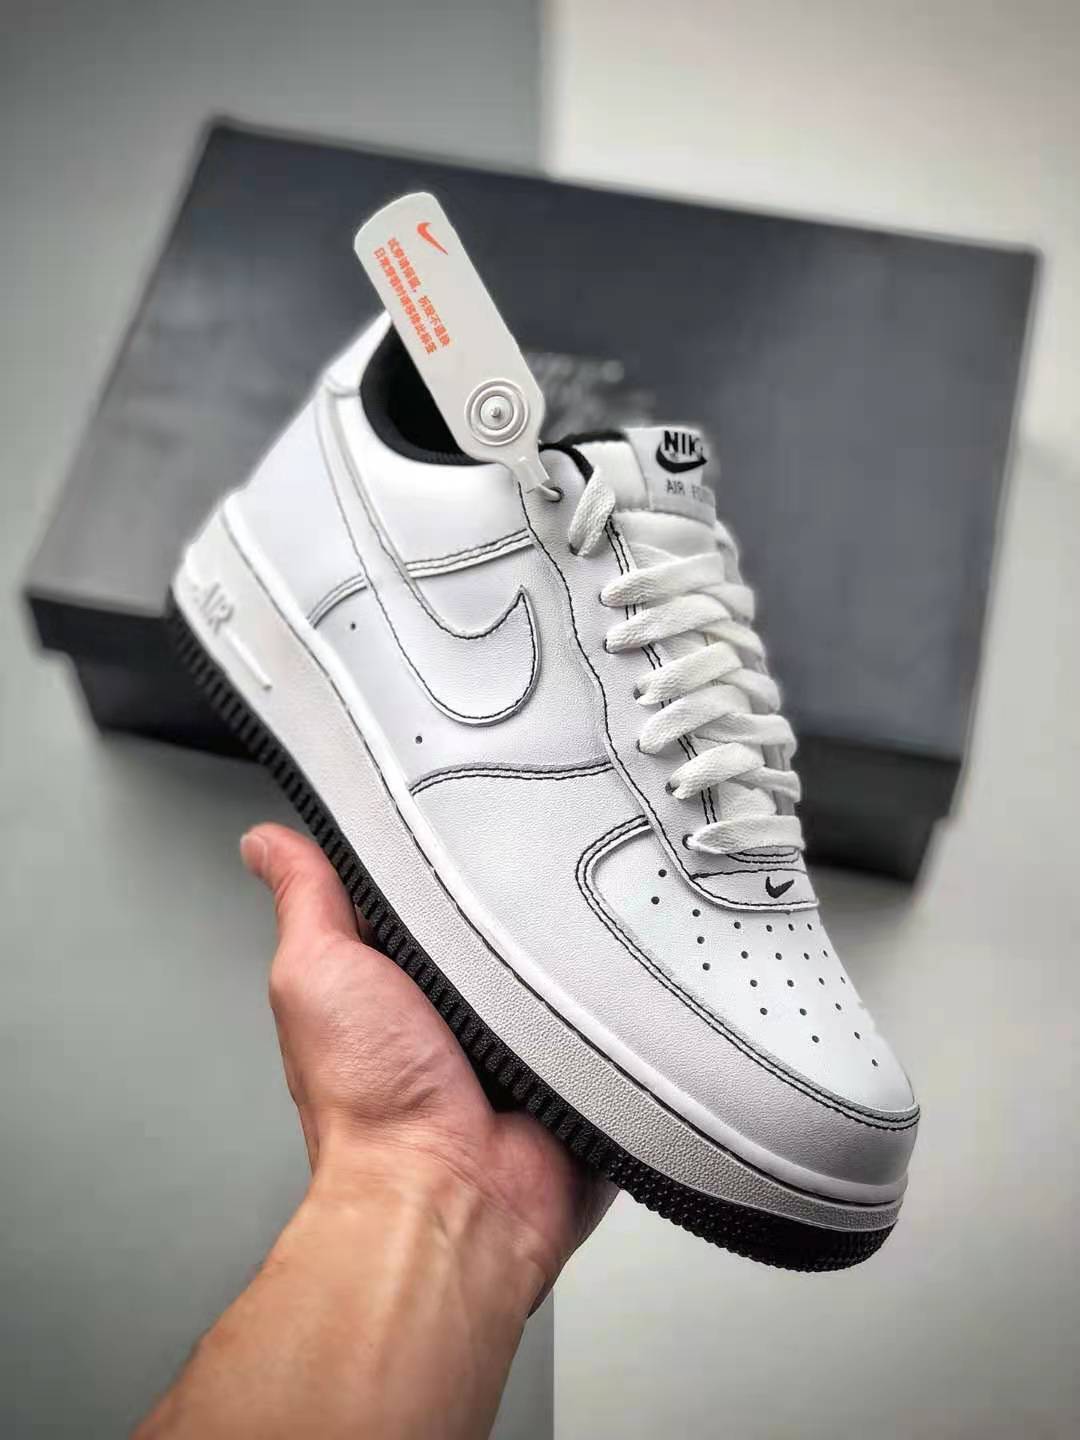 Nike Air Force 1 '07 'Contrast Stitch' CV1724-104 - Stylish and Classic Sneakers